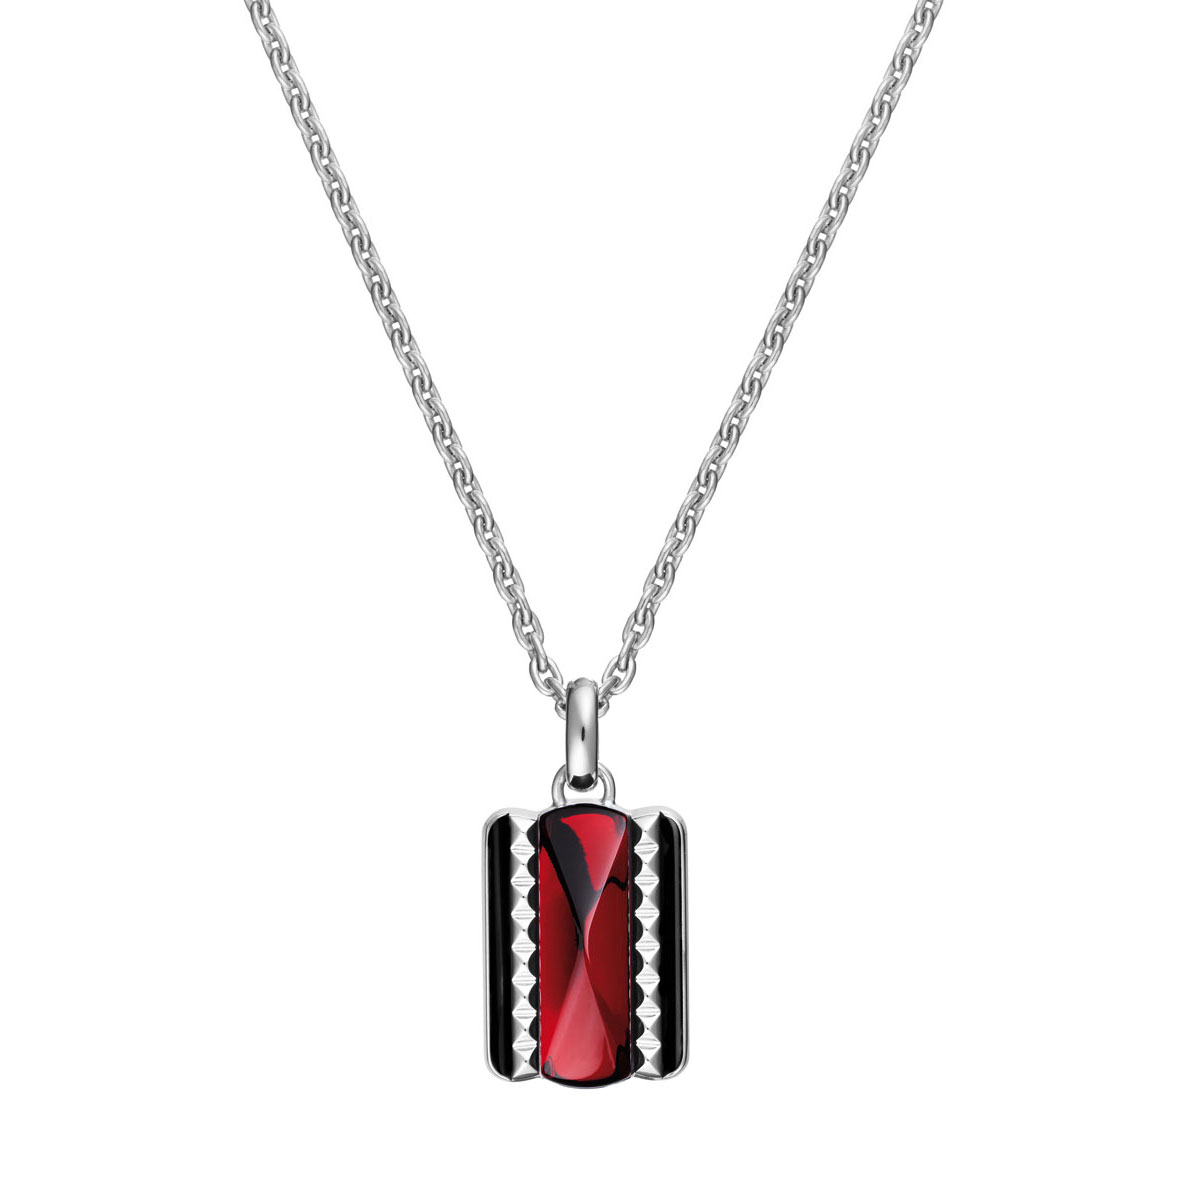 Baccarat Crystal Louxor Necklace, Silver and Red Mirror